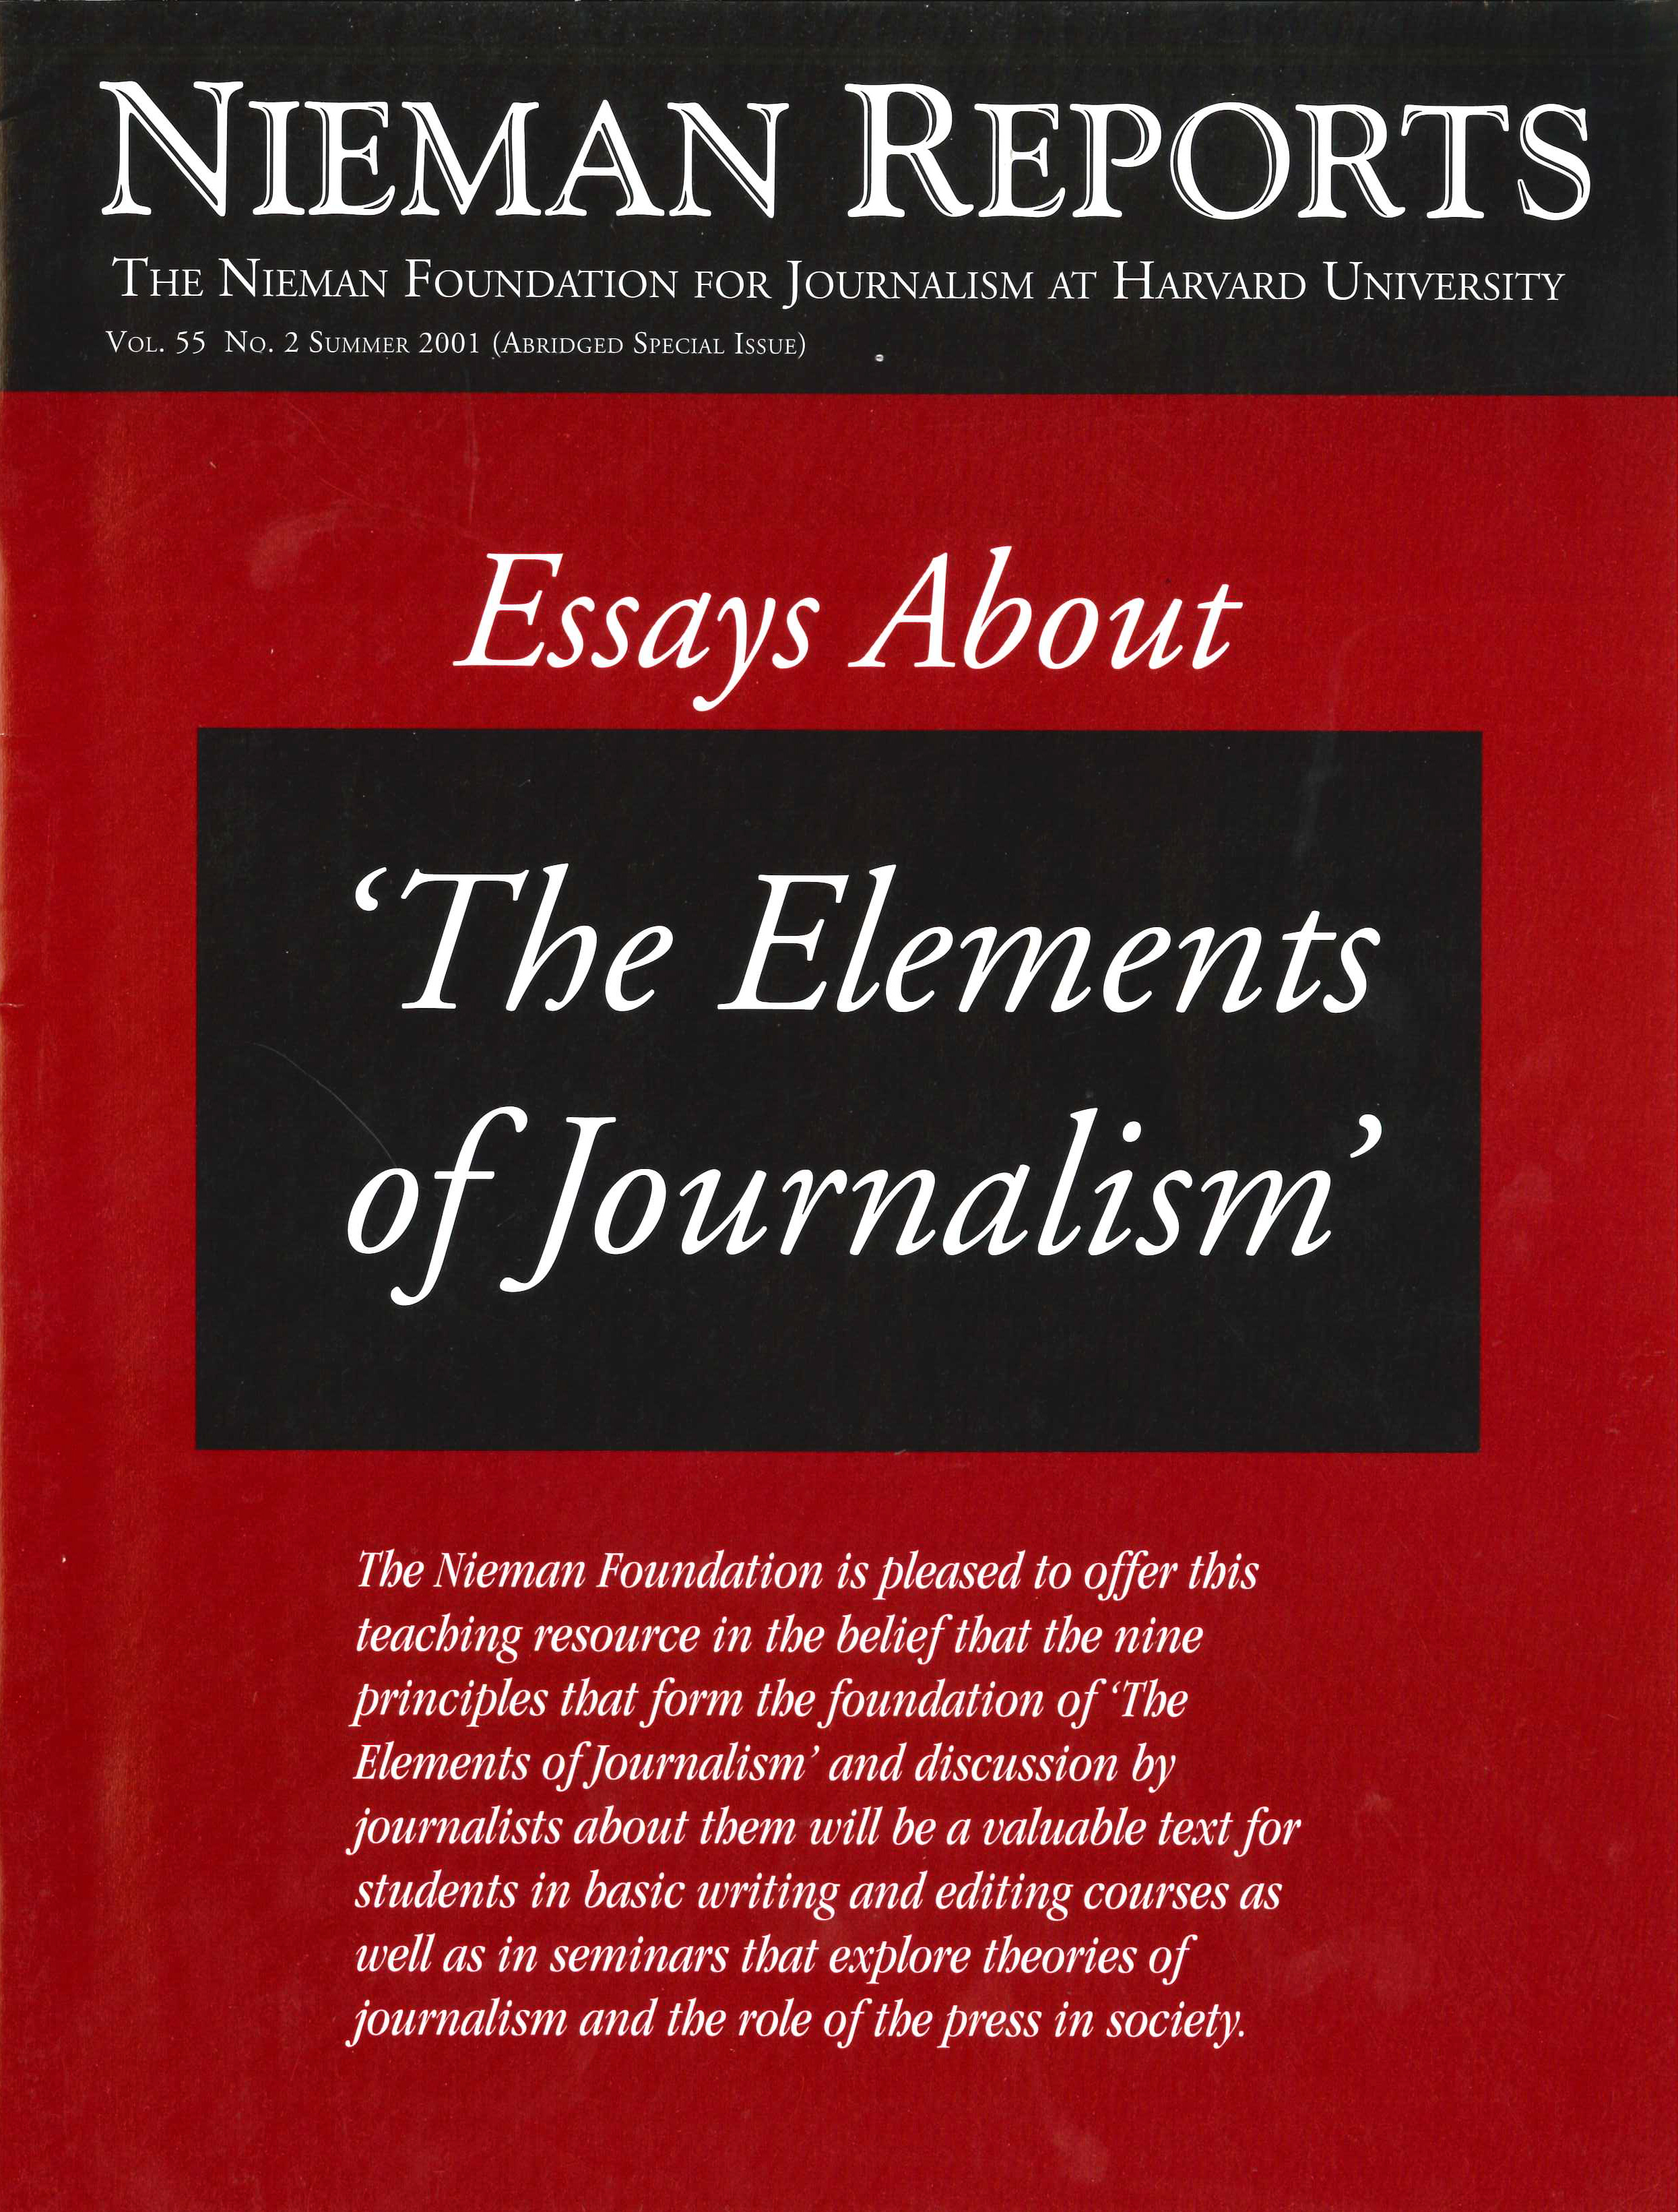 Special Issue 2001